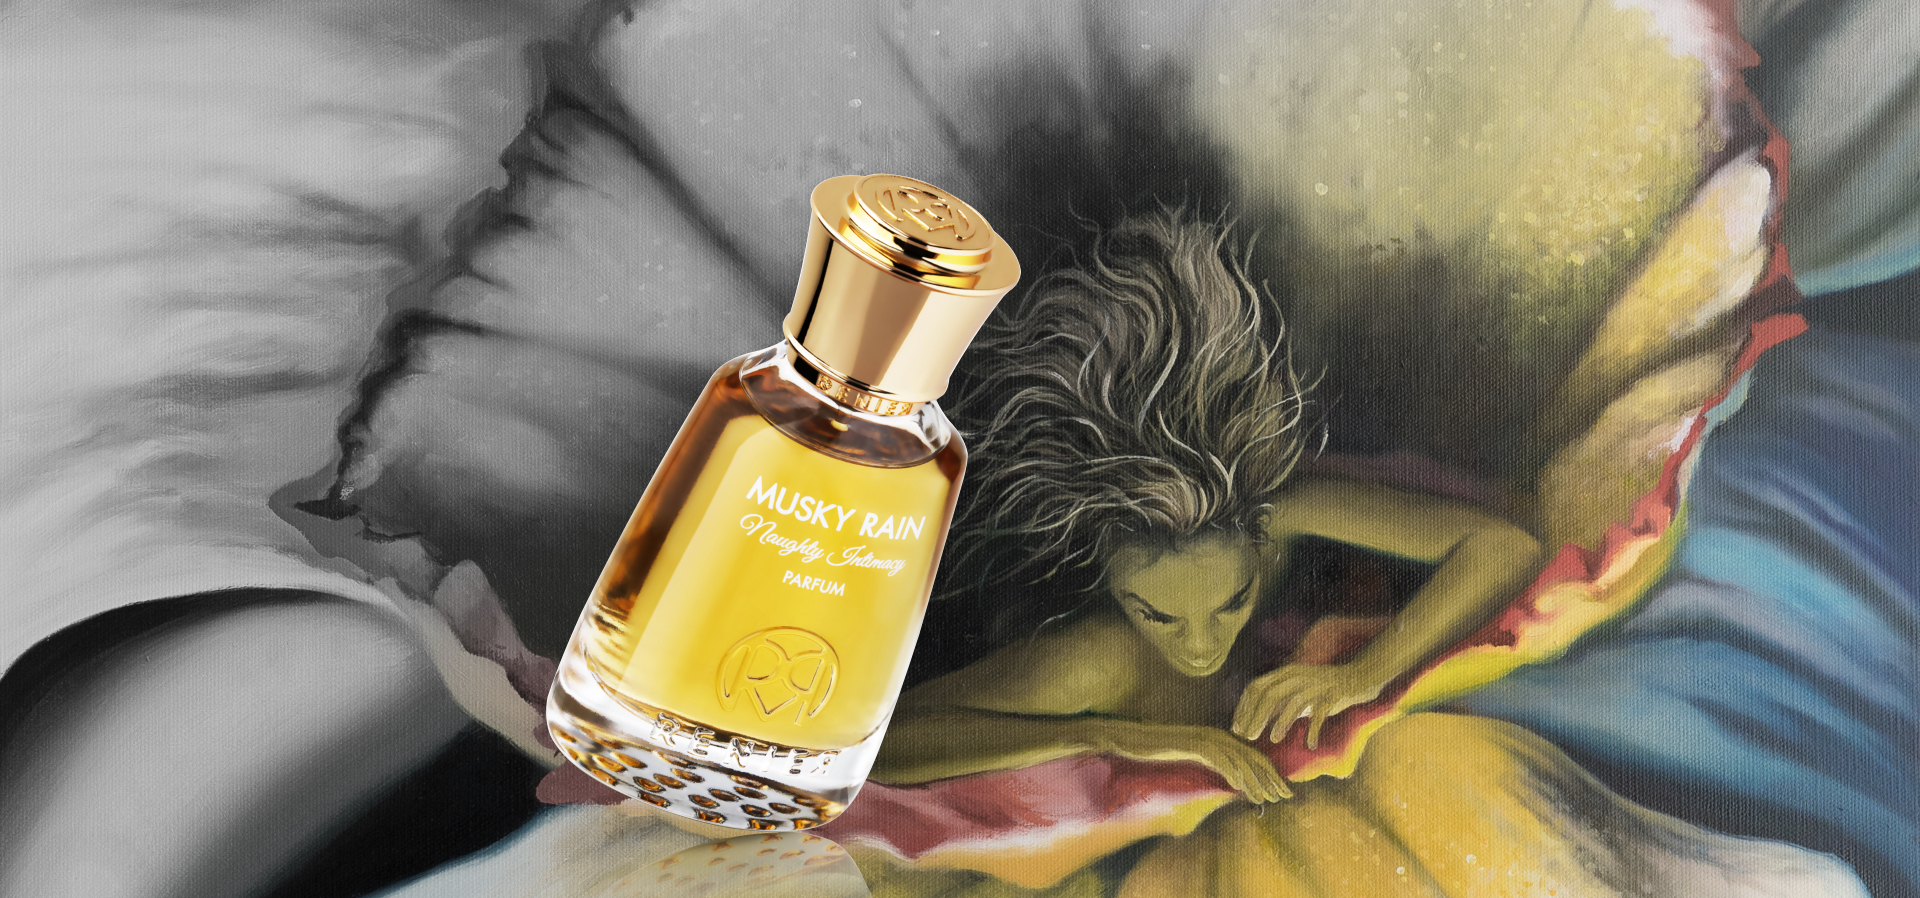 100 vintage 70s perfumes that will take you straight back in time